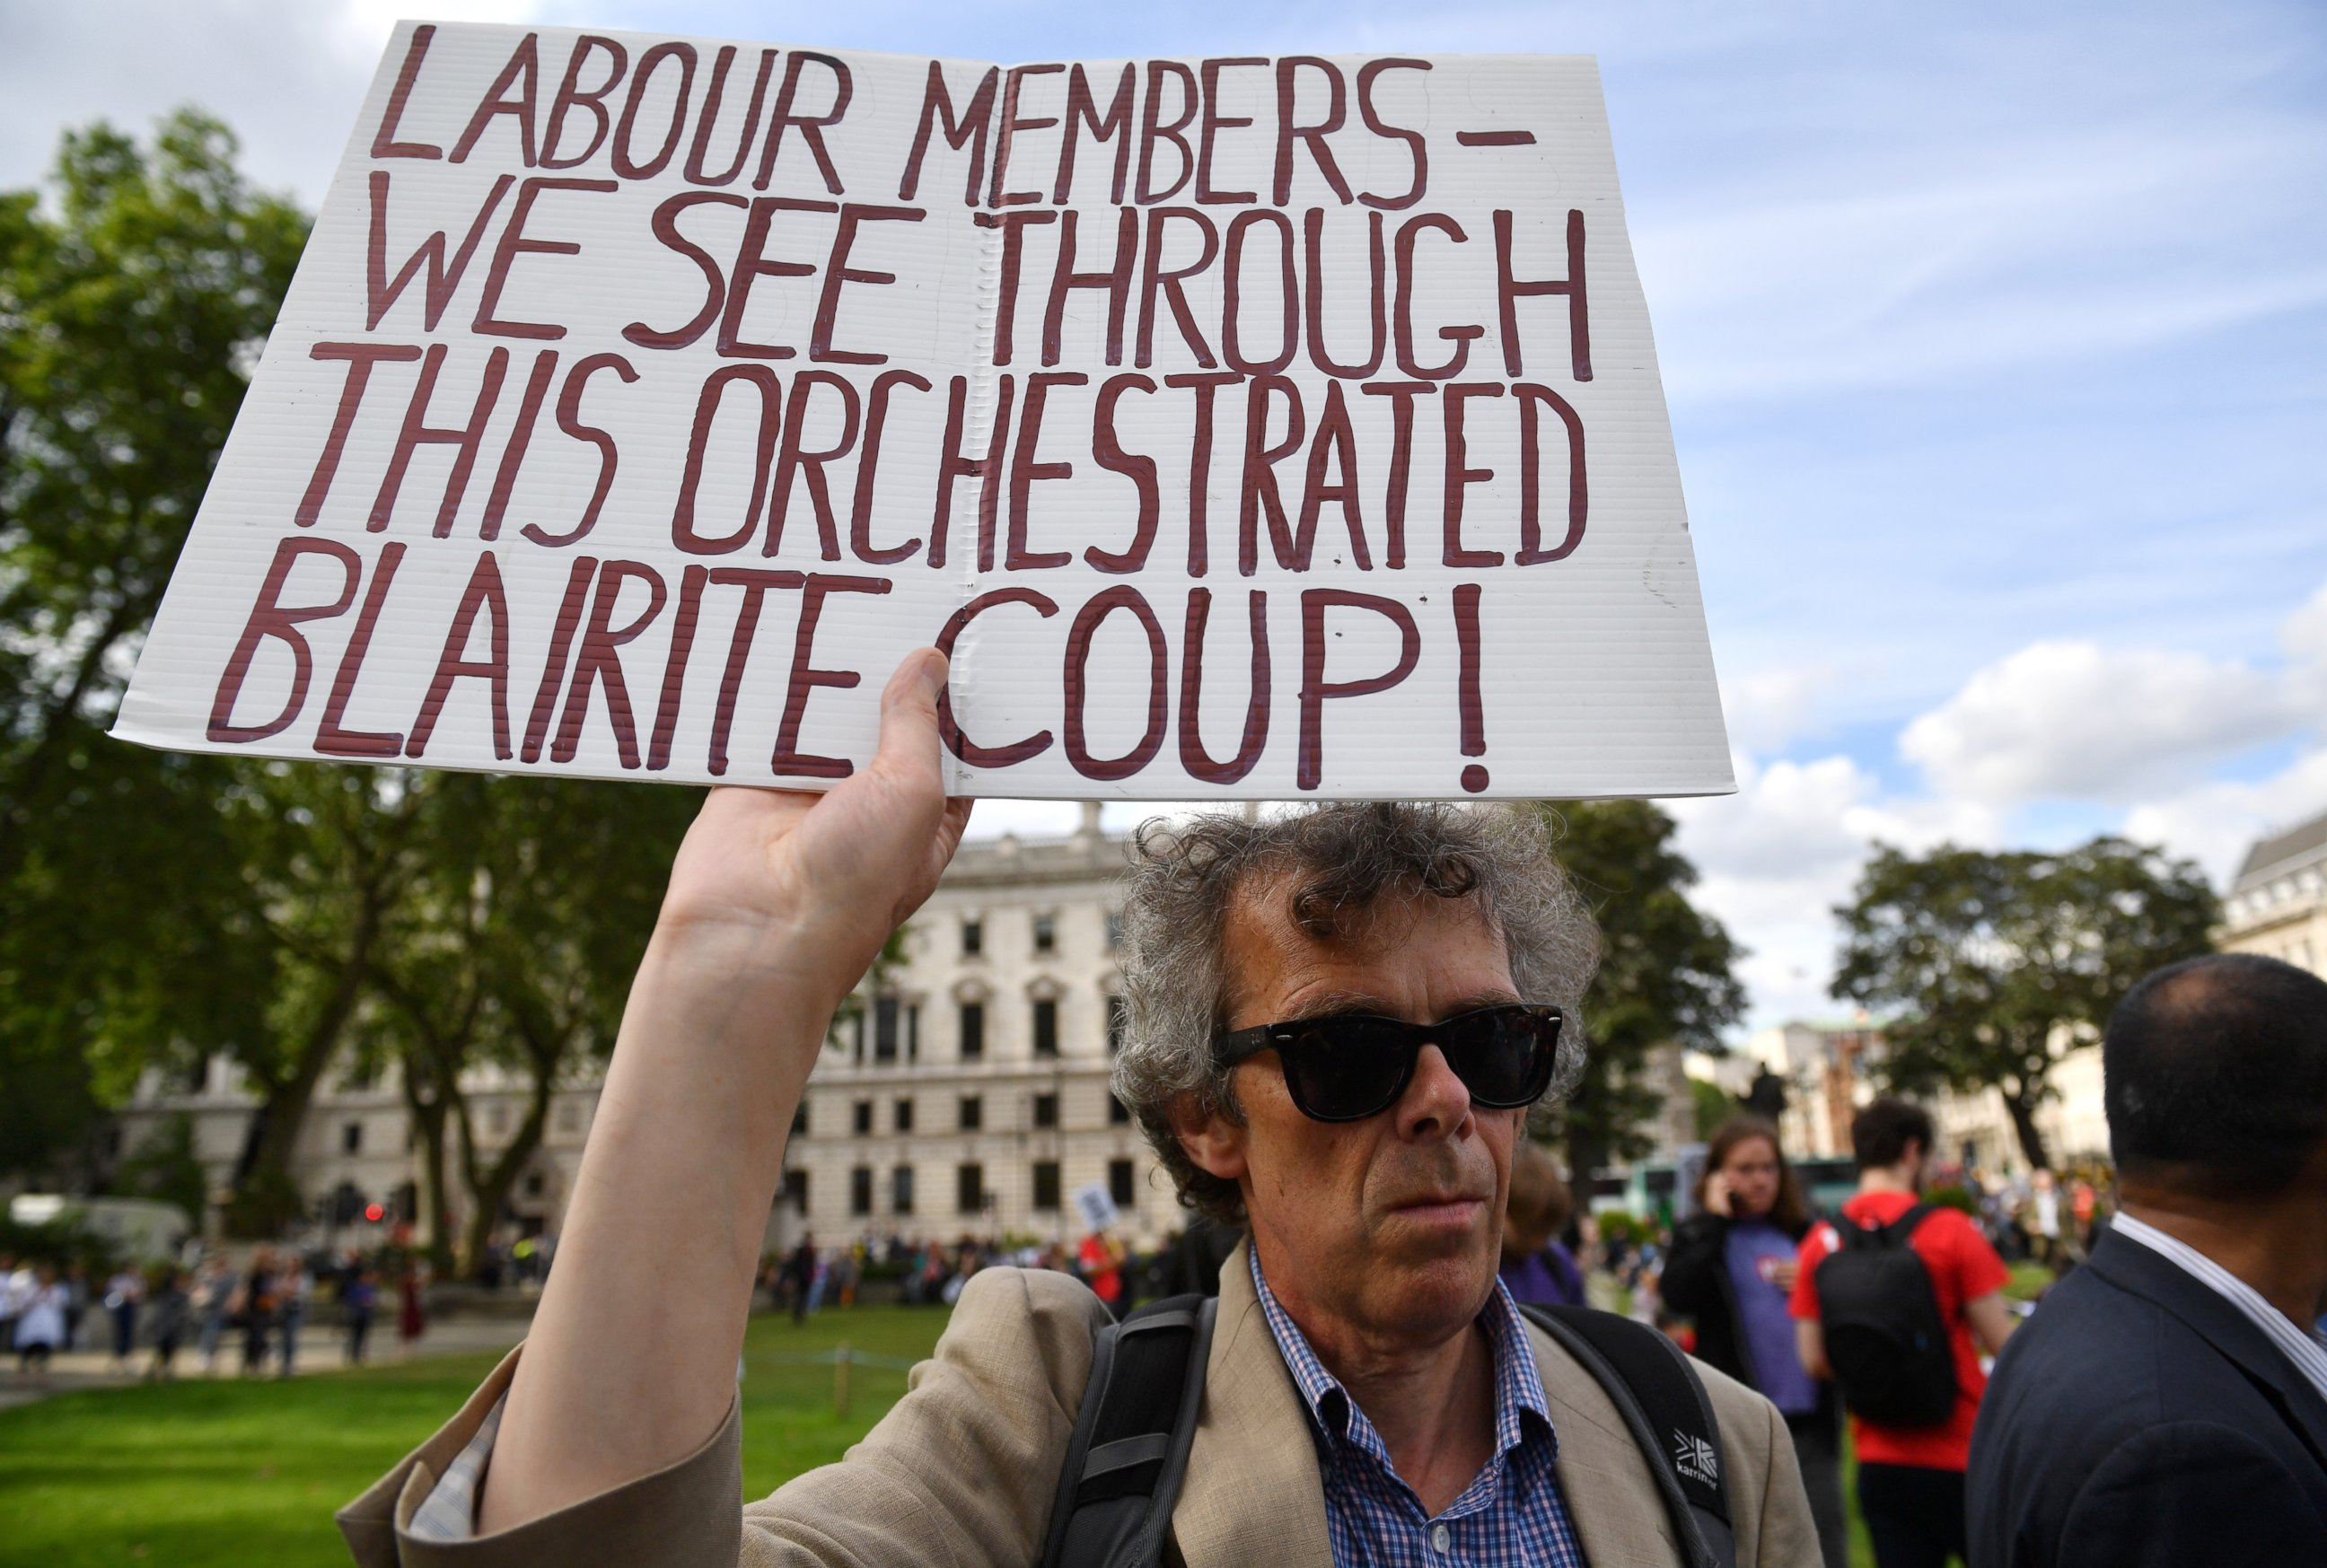 PHOTO: A protester holds up a sign accusing Labour members of a "Blairite Coup" during Momentum's 'Keep Corbyn' rally outside the Houses of Parliament, June 27, 2016 in London.